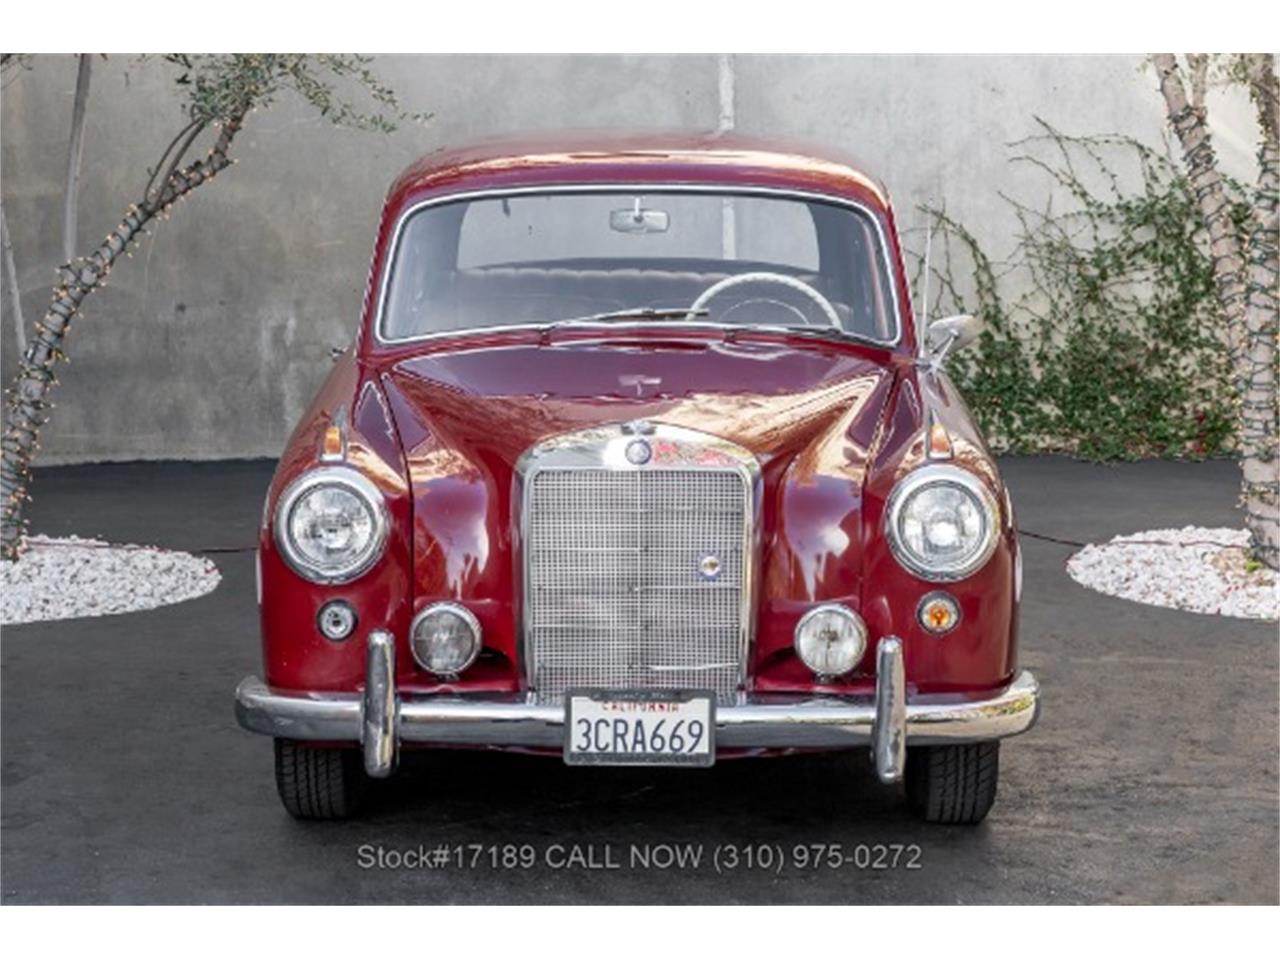 For Sale: 1959 Mercedes-Benz 220S in Beverly Hills, California for sale in Beverly Hills, CA